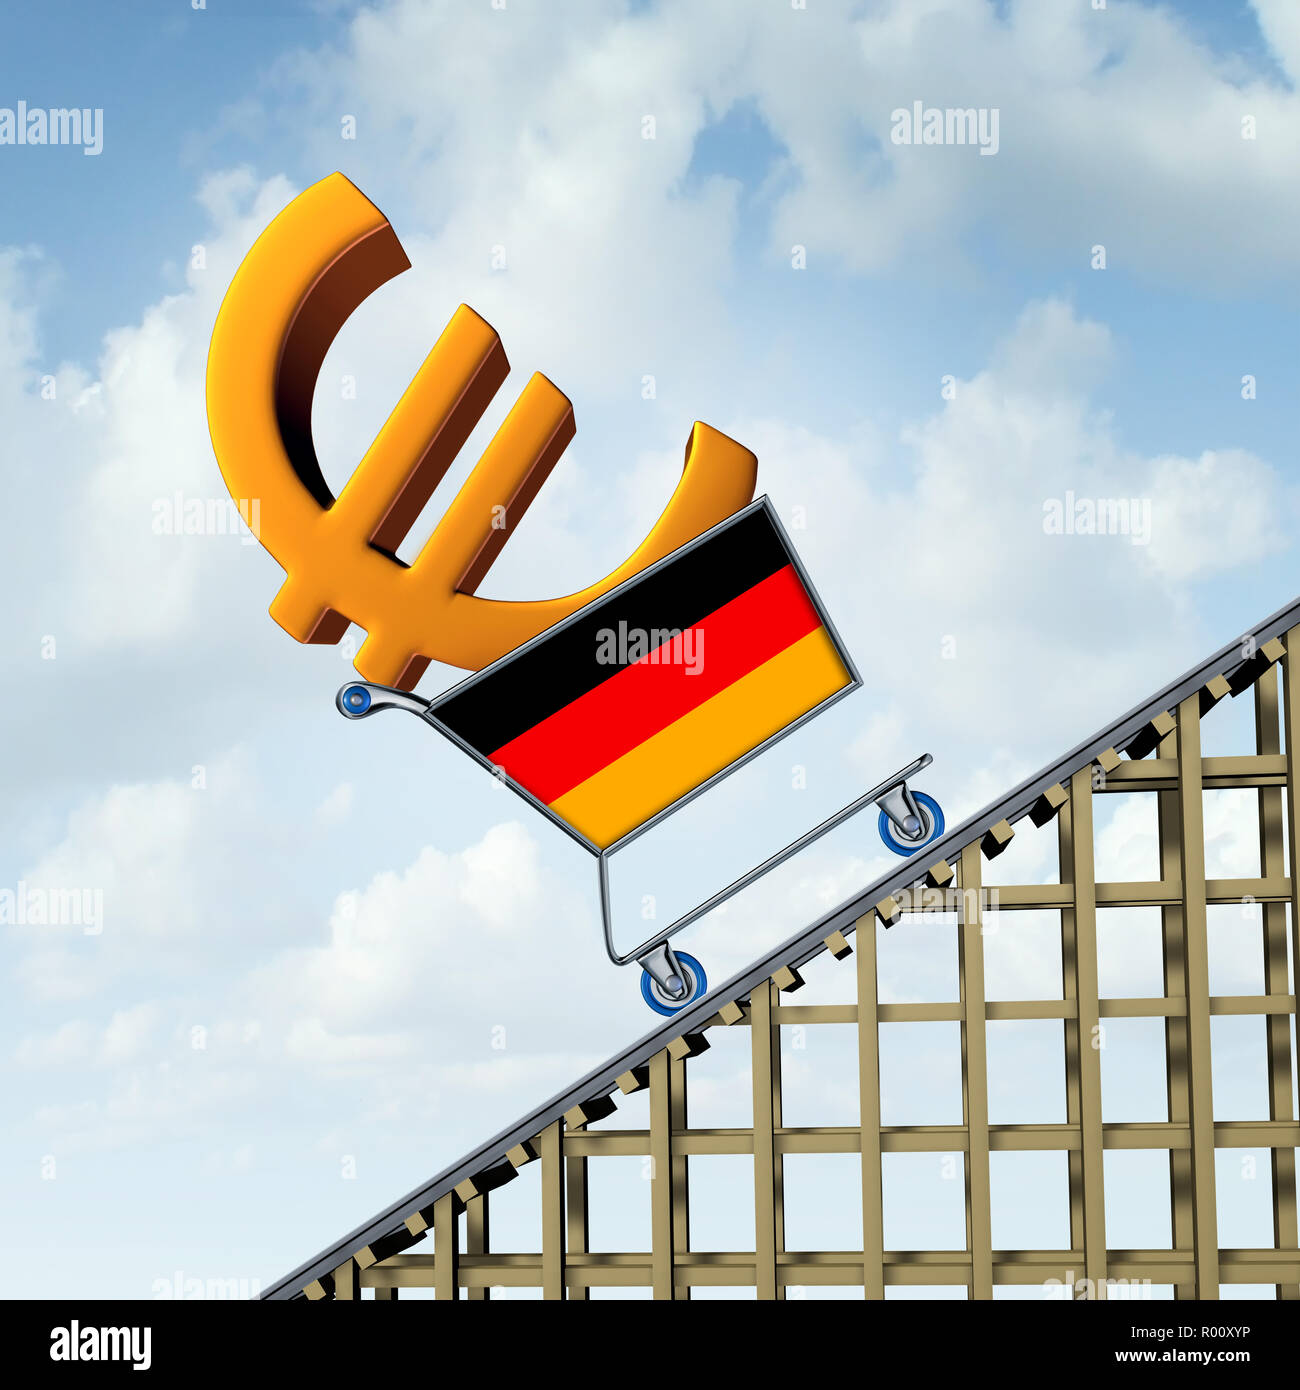 German inflation rise in a booming Germany economy and financial market of goods and services or European consumer prices and economic Euro currency. Stock Photo